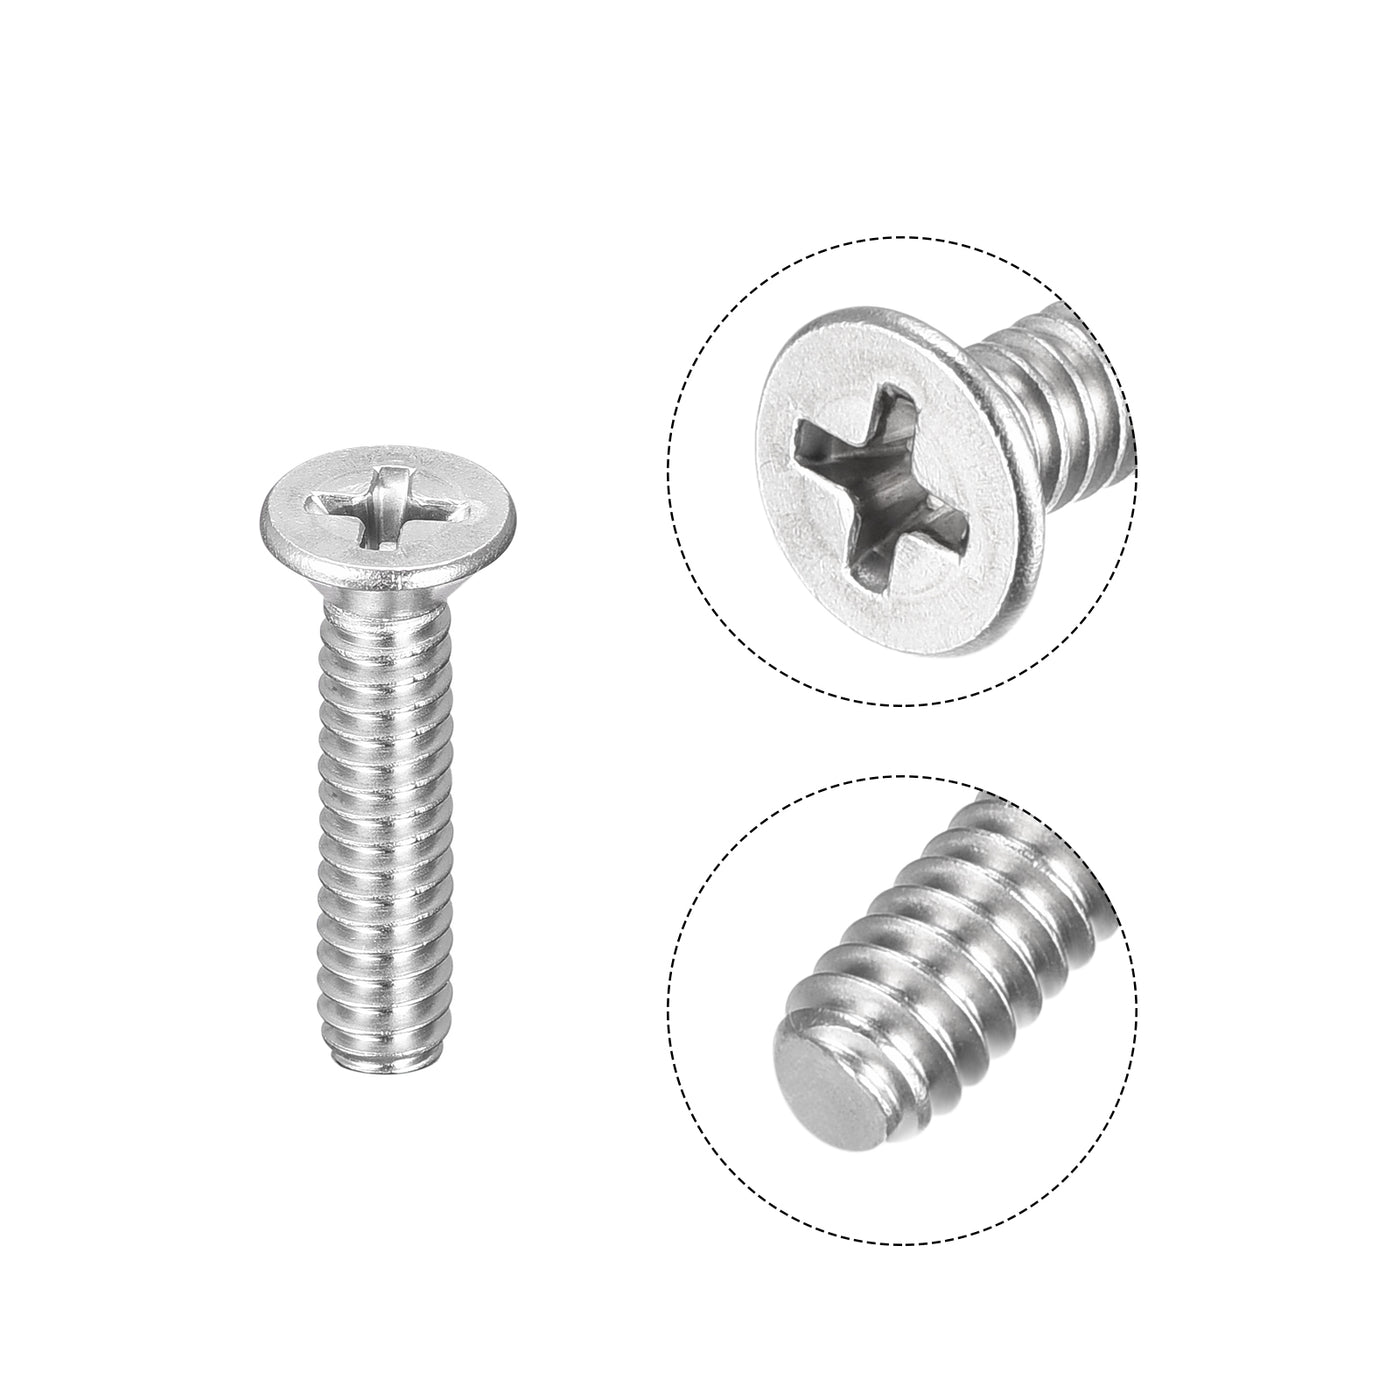 uxcell Uxcell 10#-24x1" Flat Head Machine Screws Phillips 304 Stainless Steel Bolts 25pcs